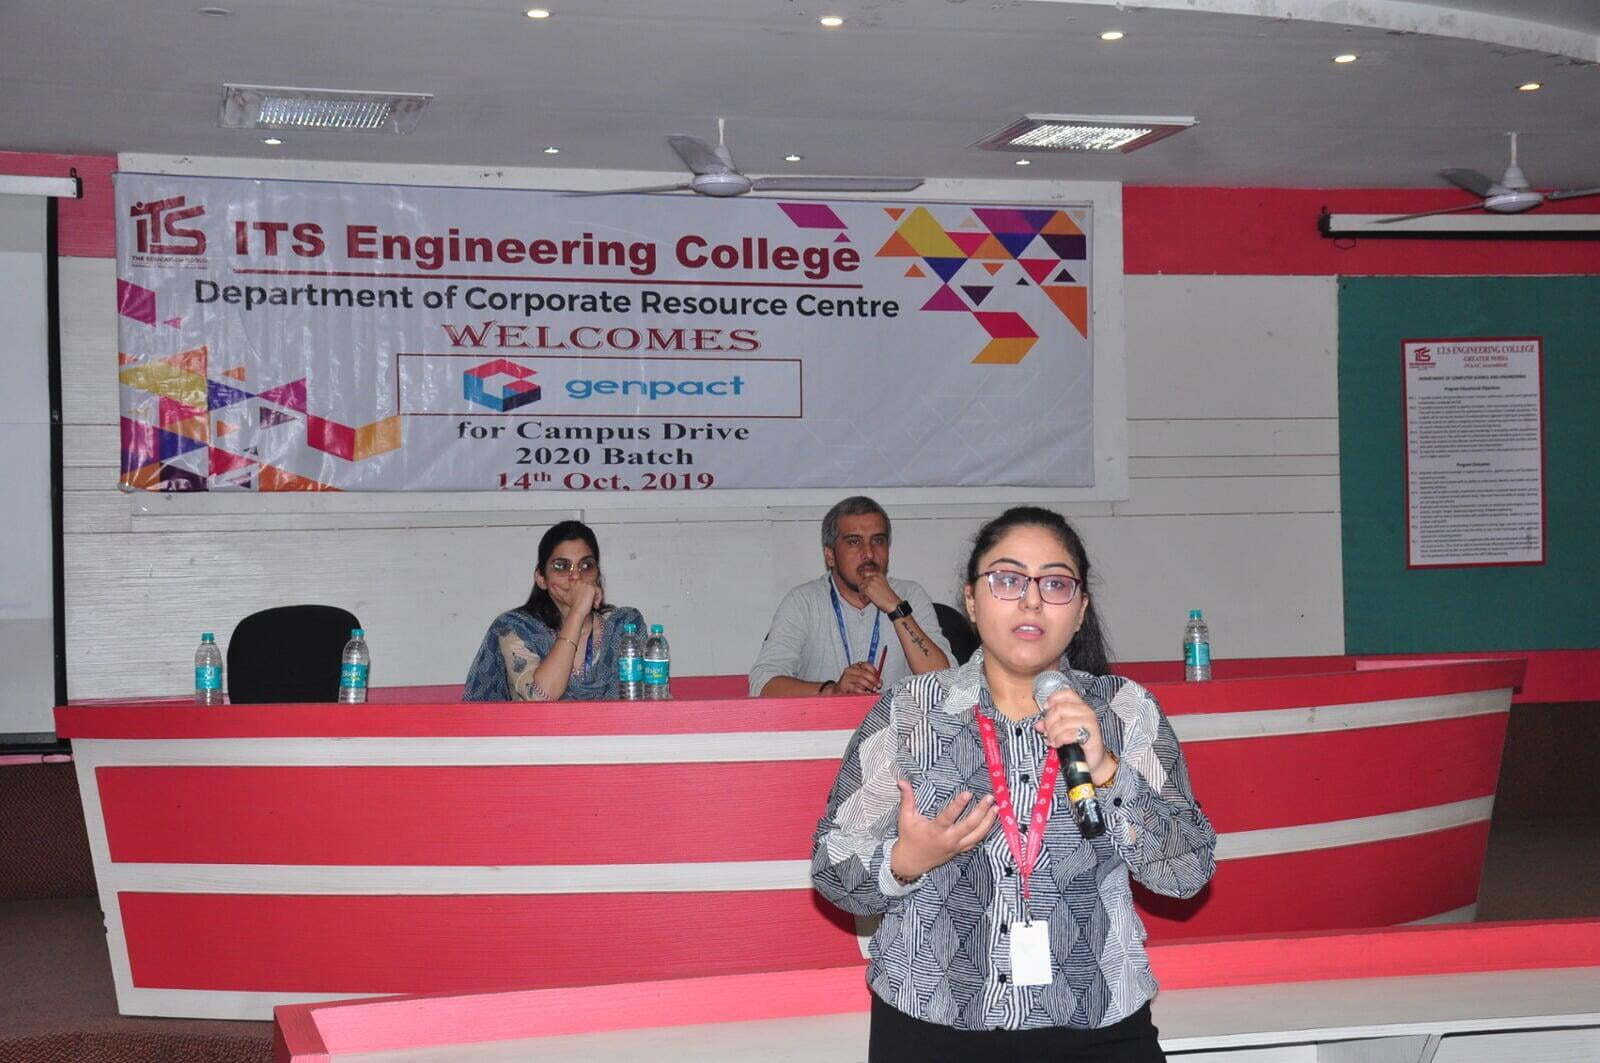 Genpact ITS Engineering College